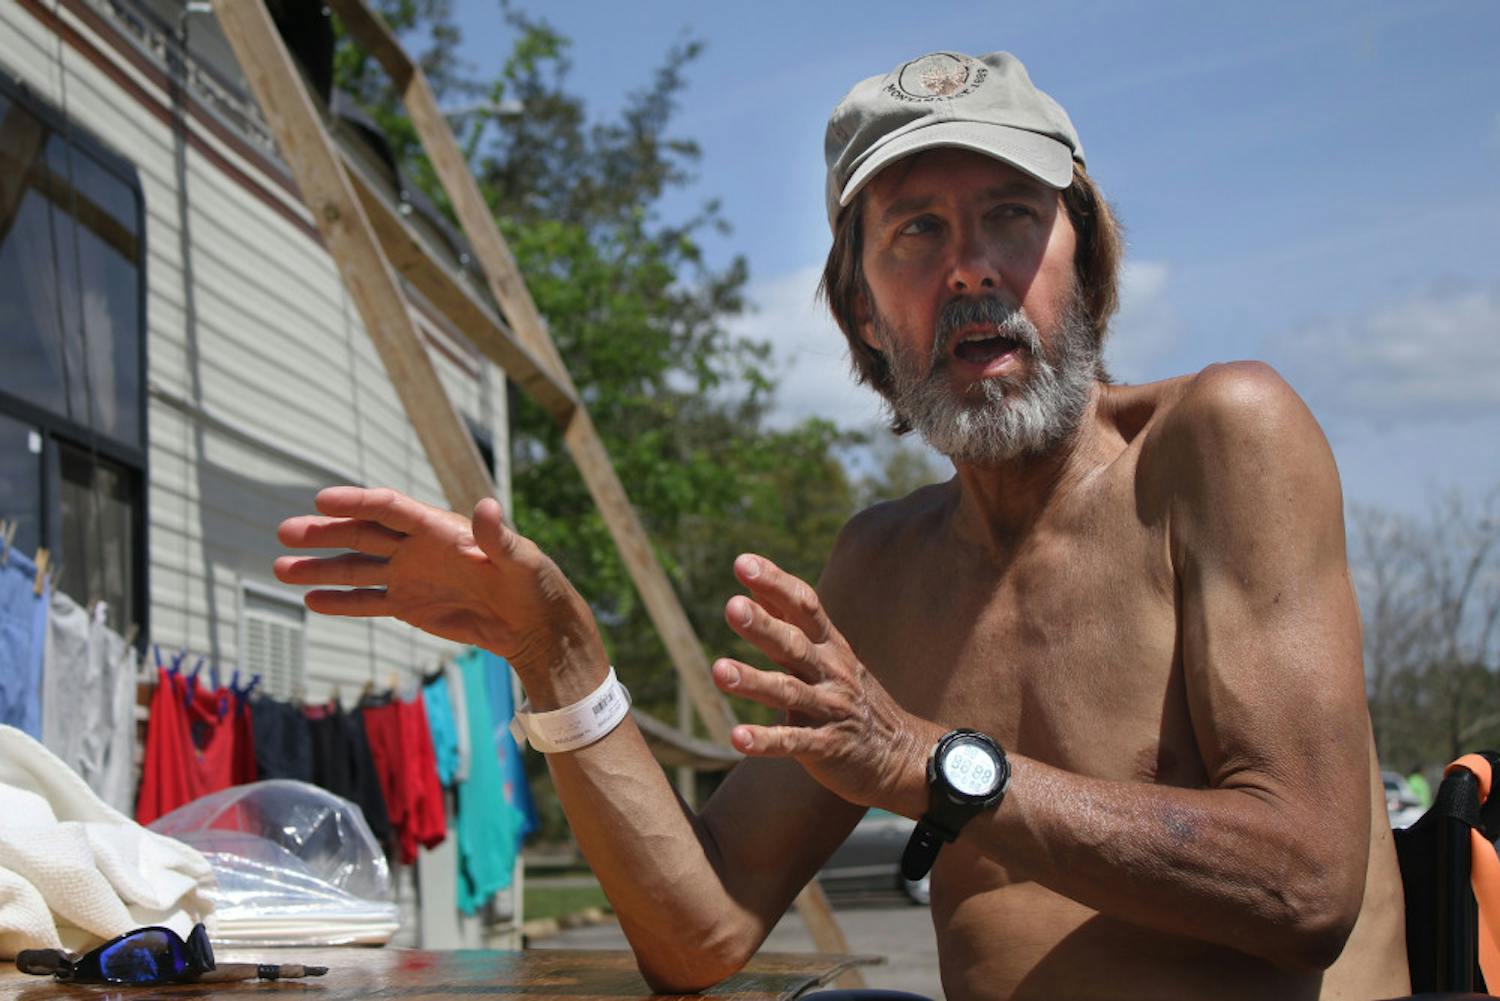 In Dignity Village, just outside the main gate of GRACE Marketplace, Mark Venzke, 62, describes his plans to renovate his motorhome so he can move out of the 6-foot tent where he currently sleeps. 